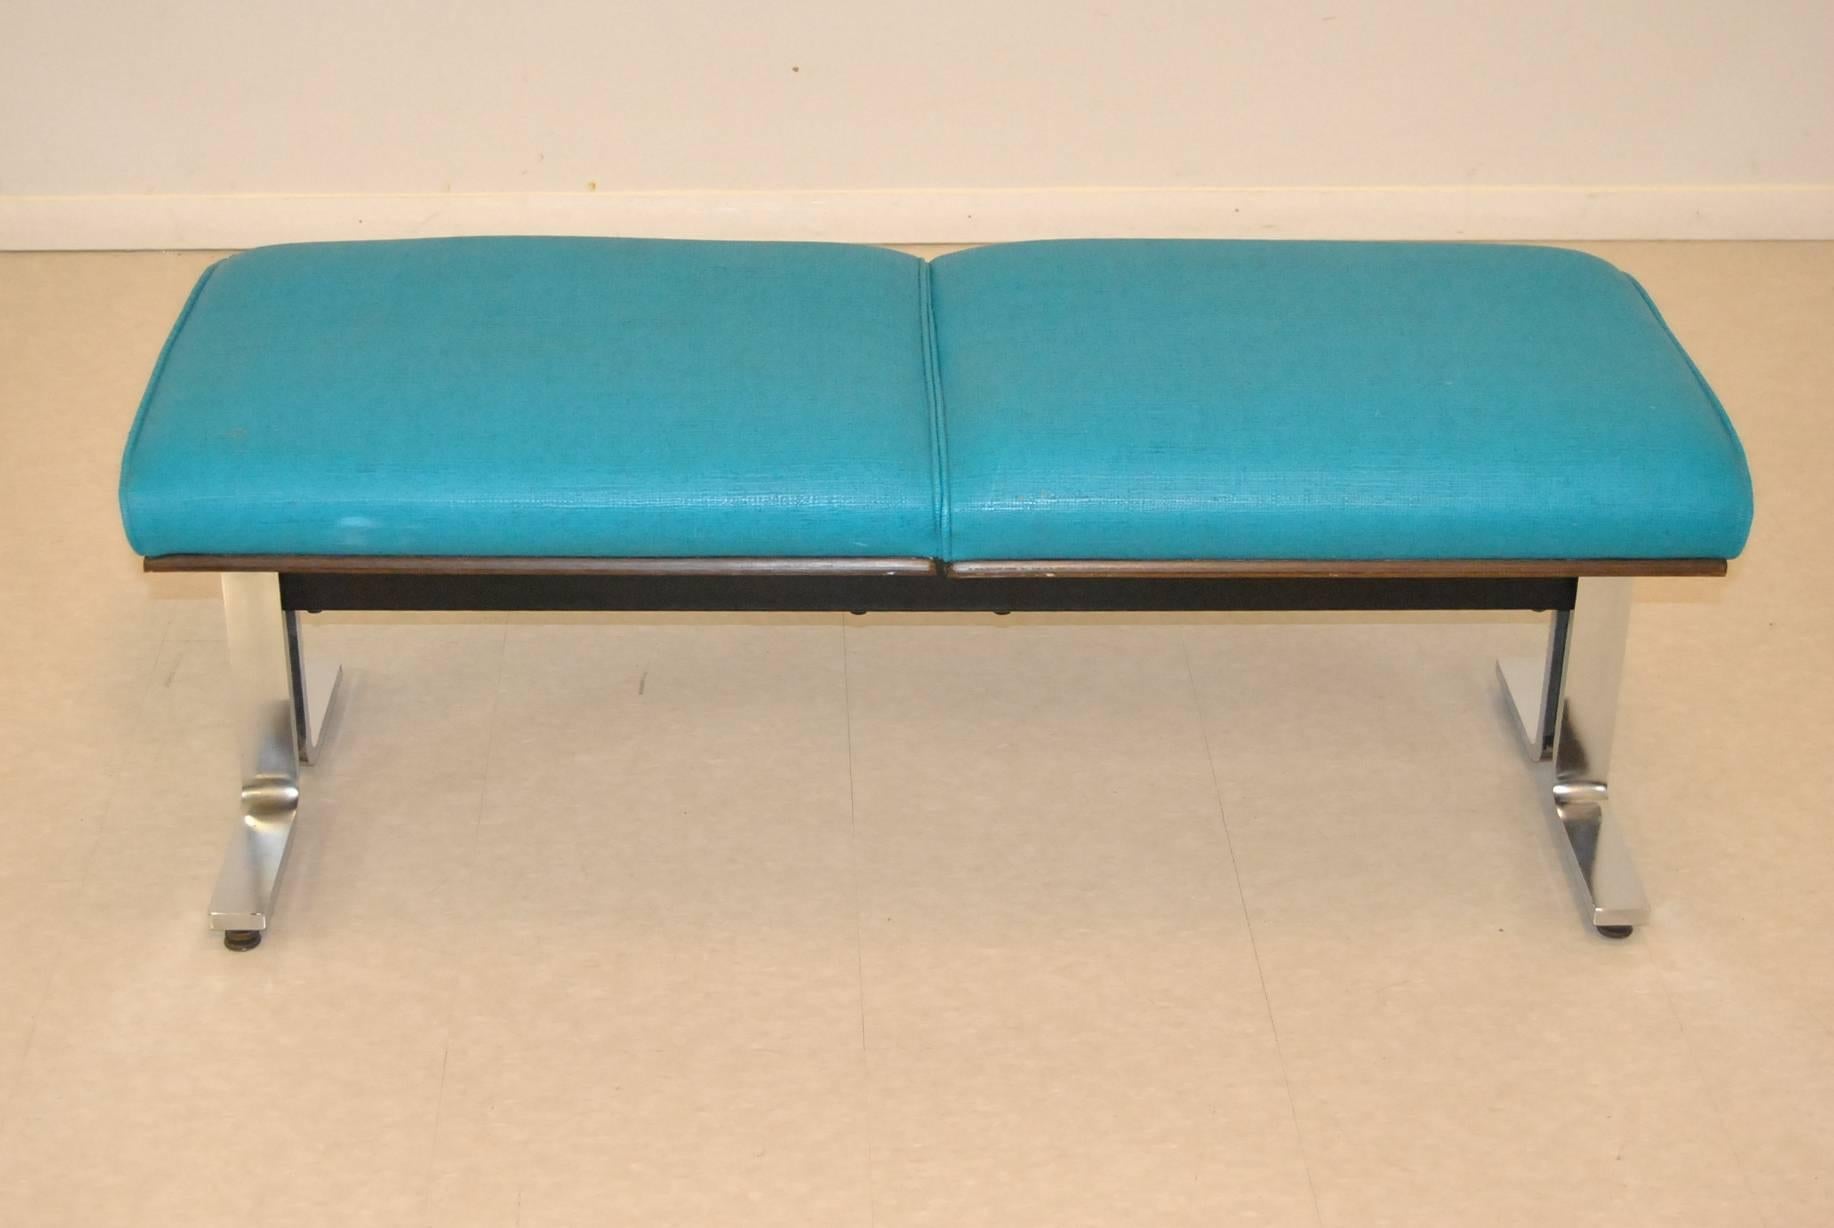 Turquoise Naugahyde upholstered bench with chrome-plated supports and heavy steel frame. Bent plywood seat. Bench is attributed to Thonet. Very good condition with minor wear to seat. Dimensions: 18.5